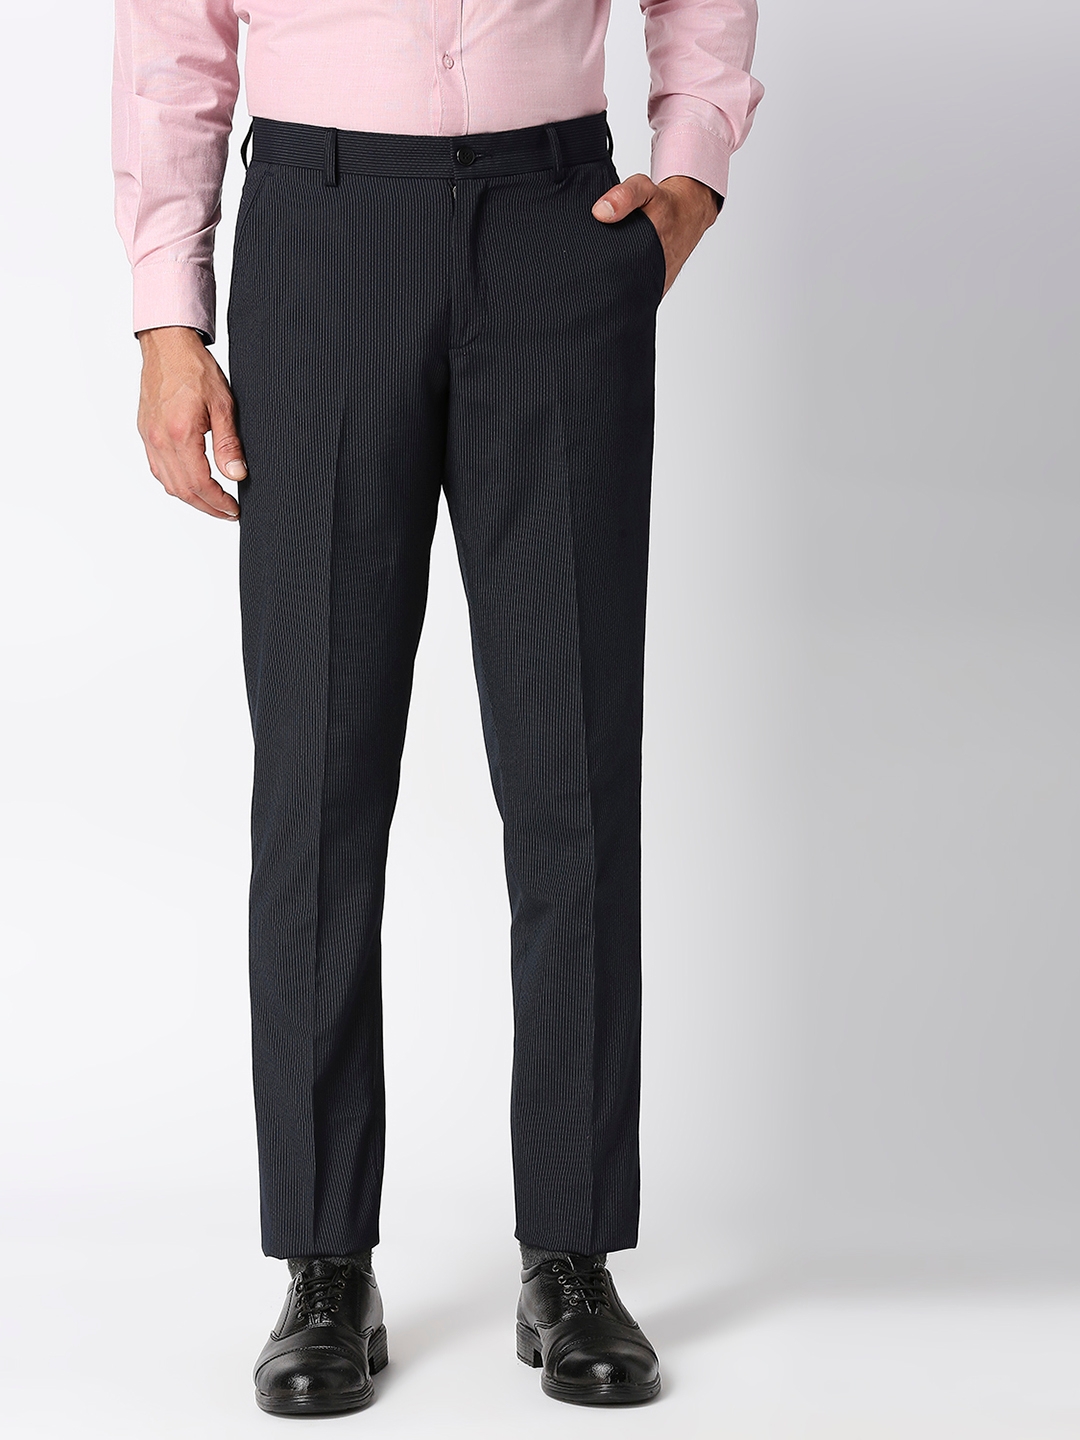 Men's Black Polyester Checked Formal Trousers